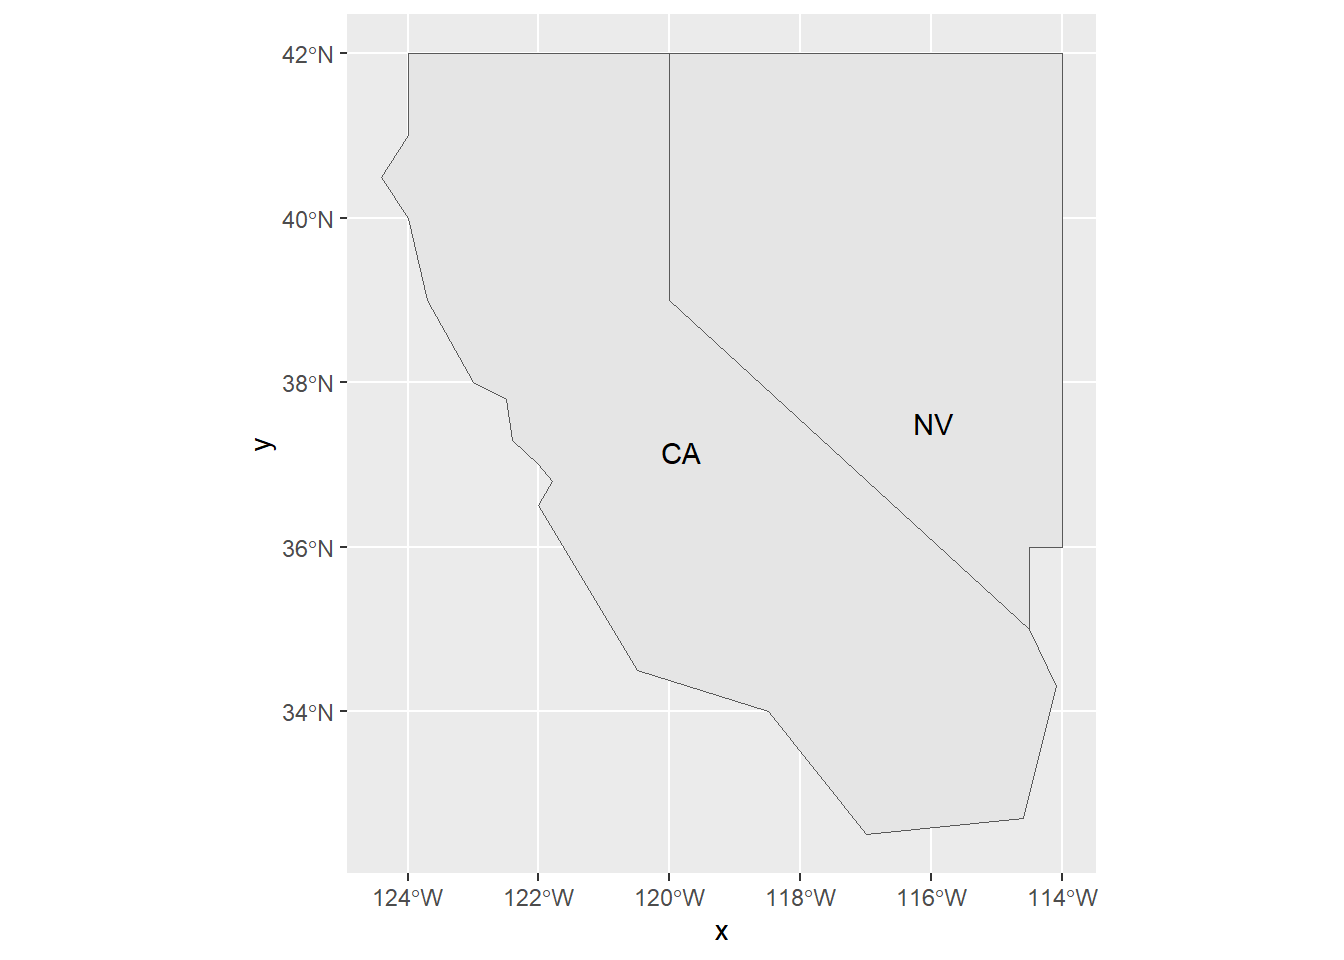 Using an sf class to build a map in ggplot2, displaying an attribute